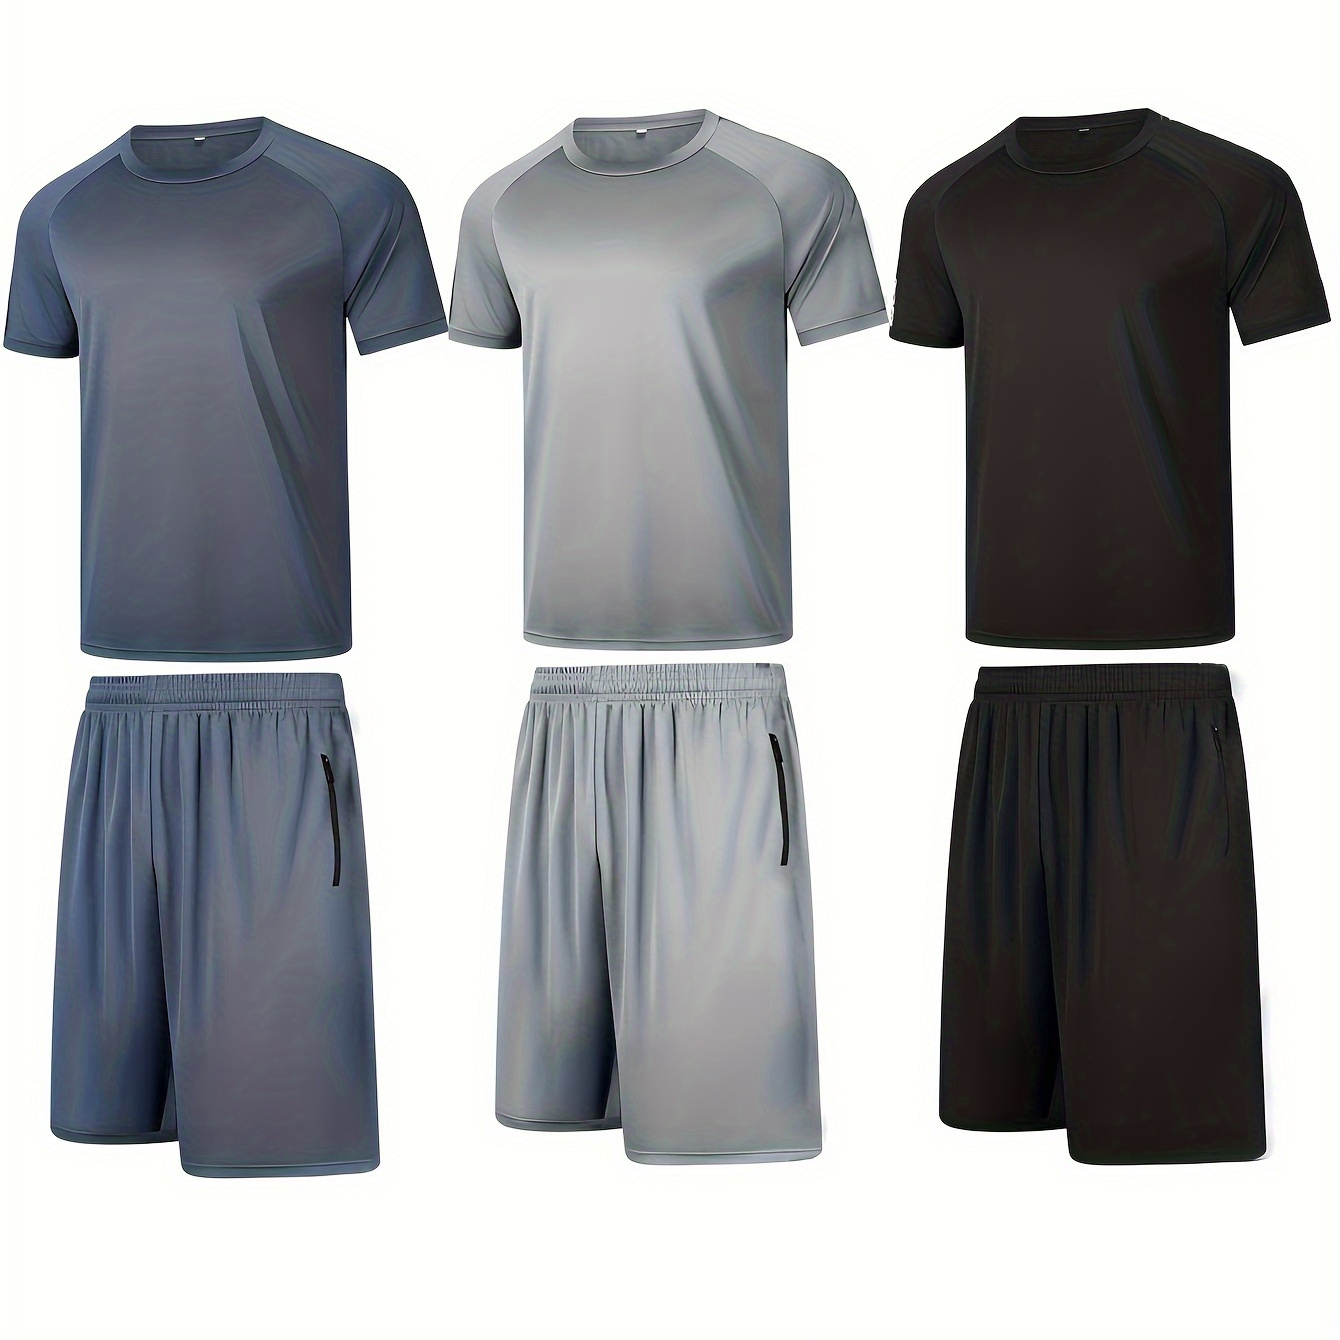 

3 Sets Trendy Outfits For Men, Casual Crew Neck Short Sleeve T-shirt And Shorts Set For Summer, Men's Clothing Vacation Workout